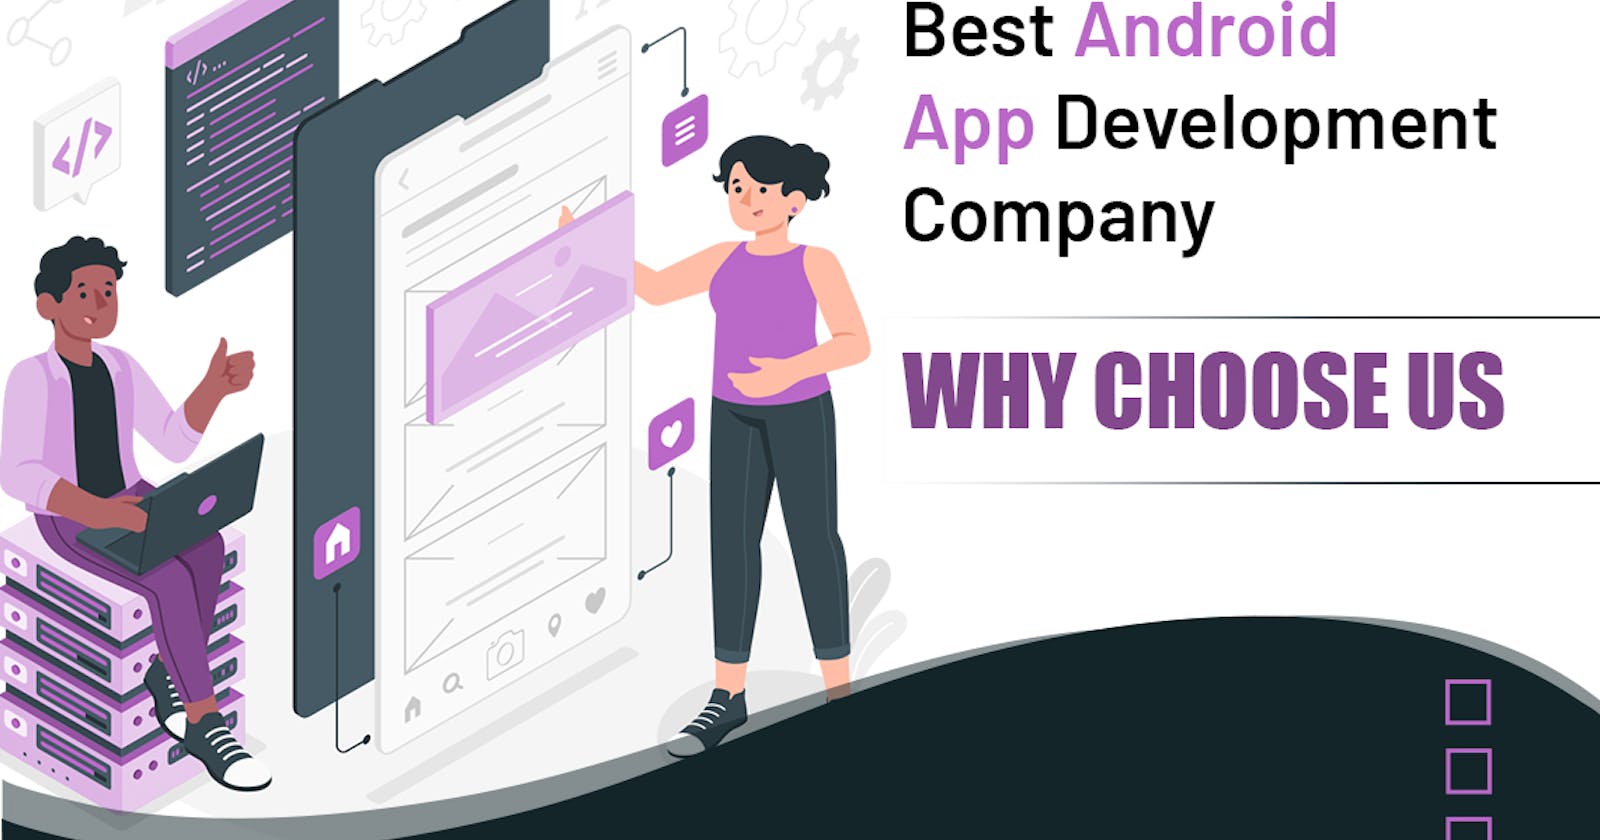 Best Android App Development Company: Why Choose Us